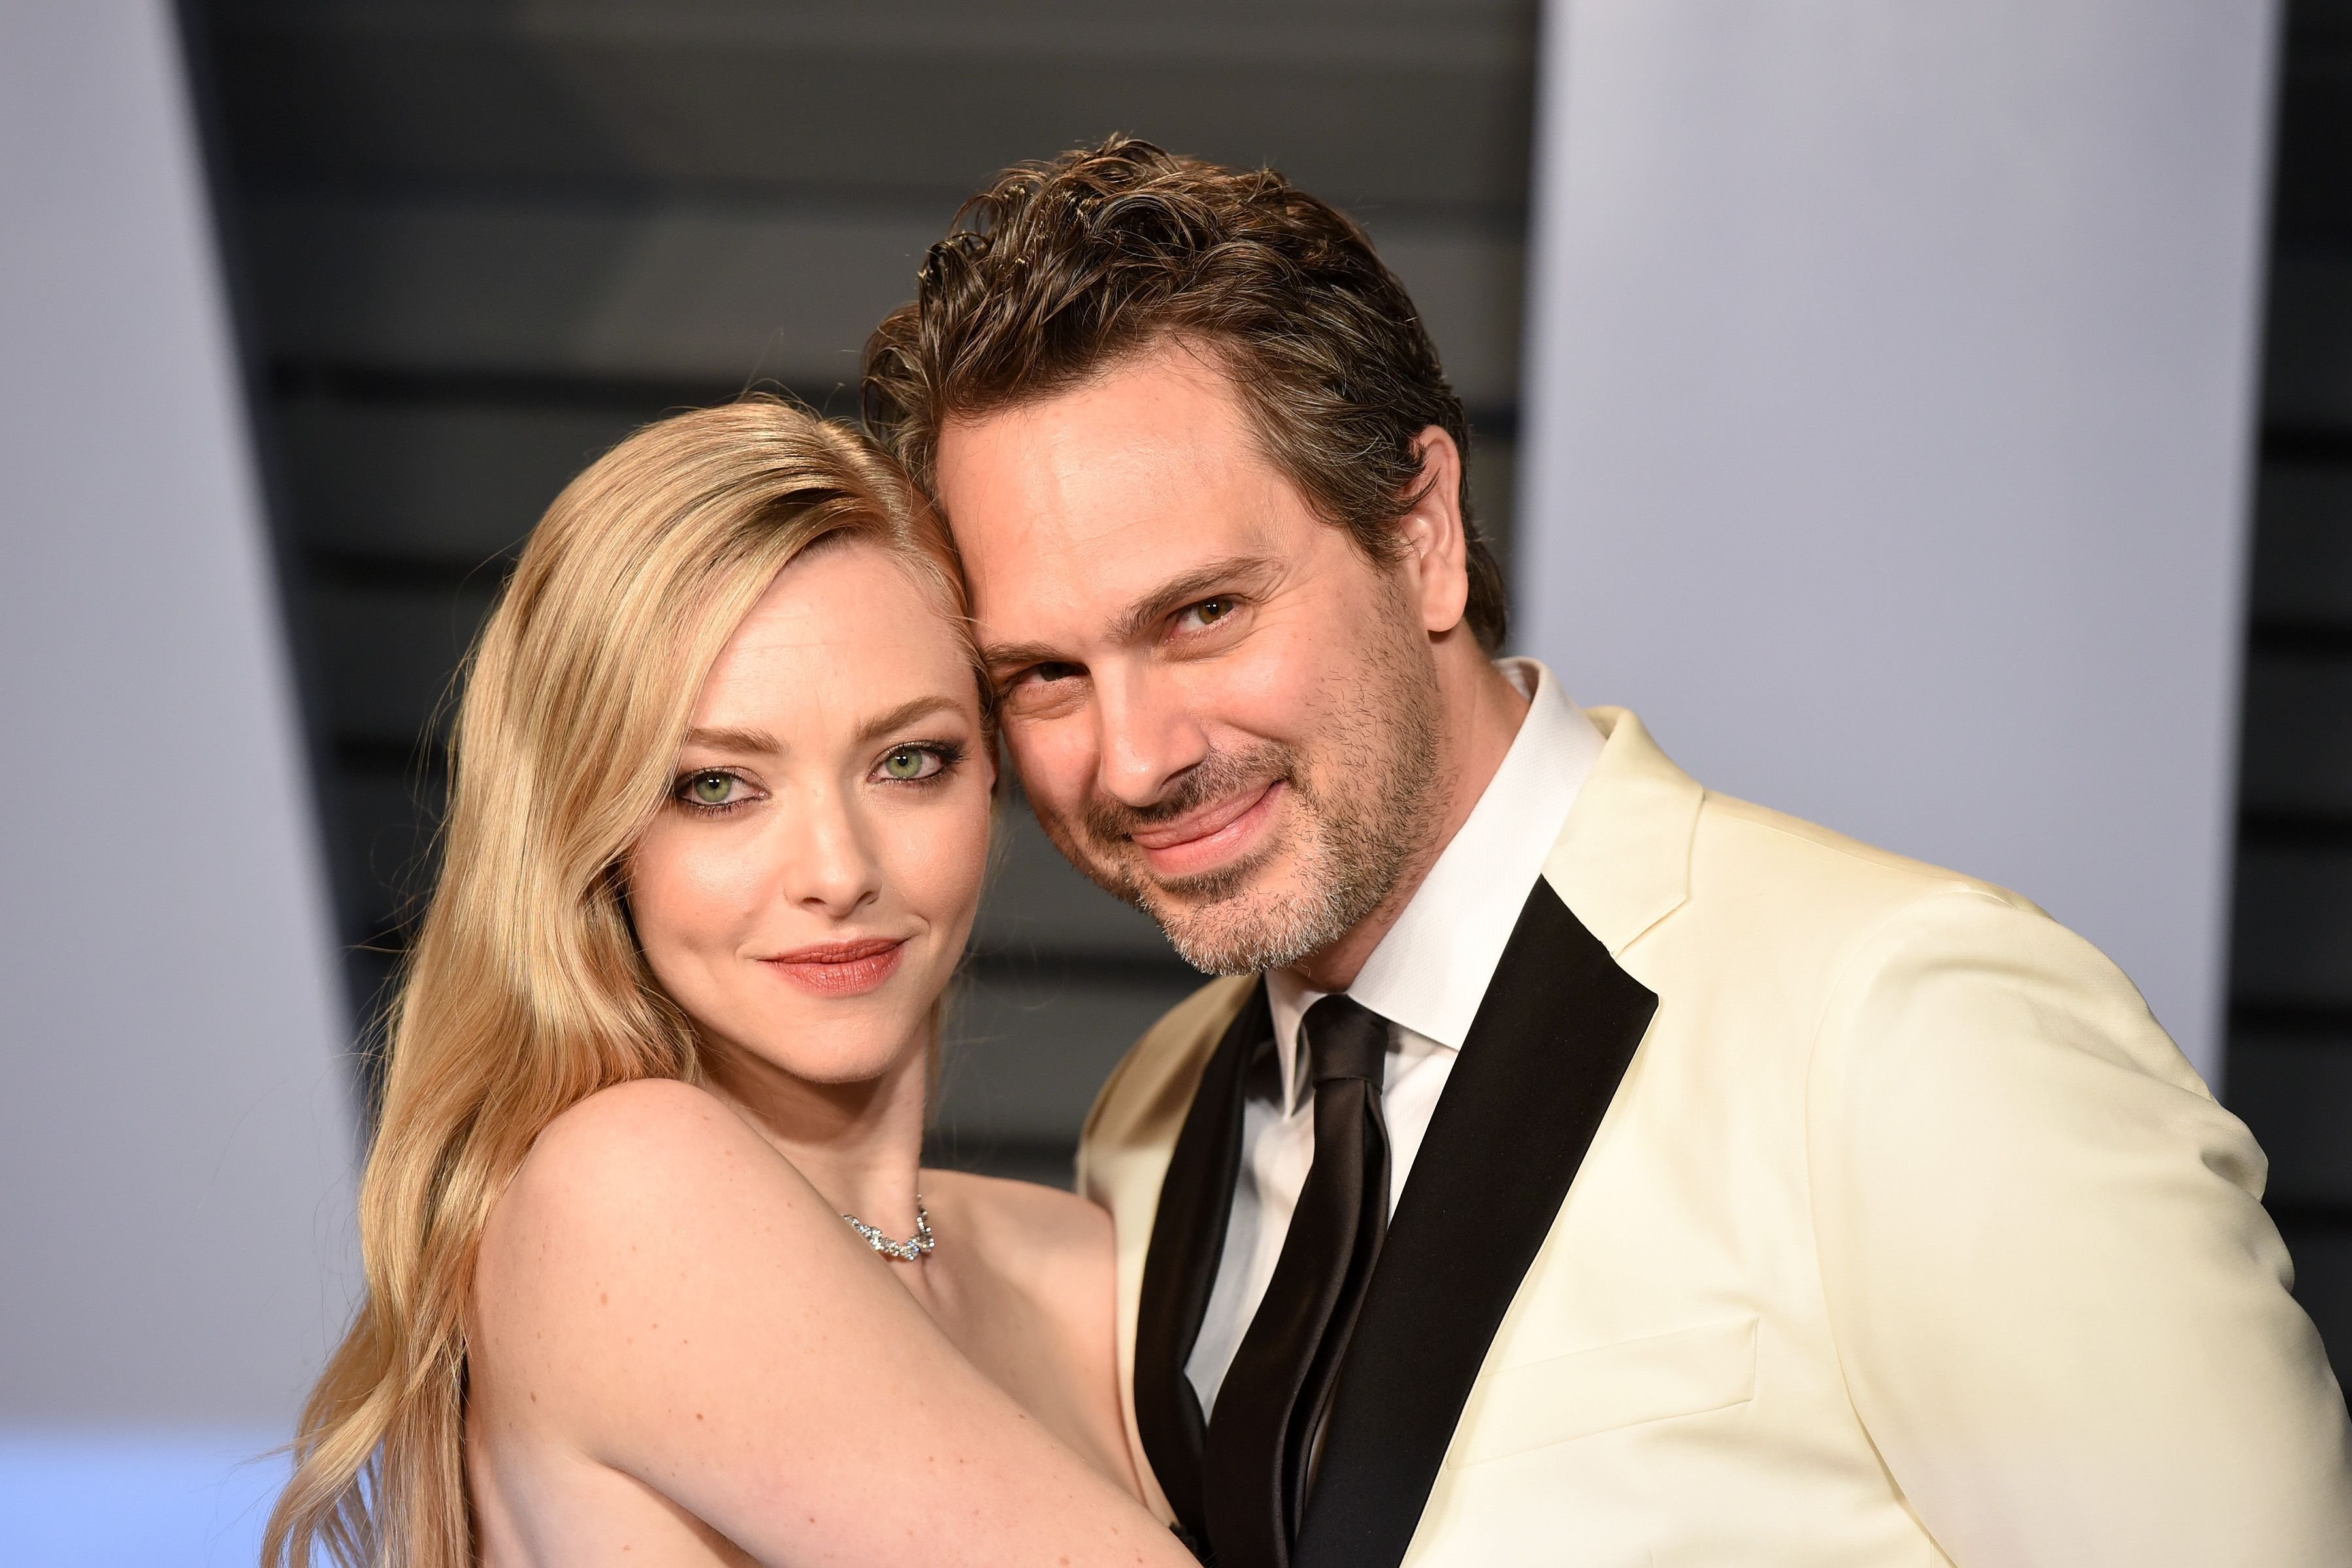 Amanda Seyfried and Thomas Sadoski during the 2018 Vanity Fair Oscar Party Hosted By Radhika Jones - Arrivals at Wallis Annenberg Center for the Performing Arts on March 4, 2018 in Beverly Hills, CA. | Source: Getty Images